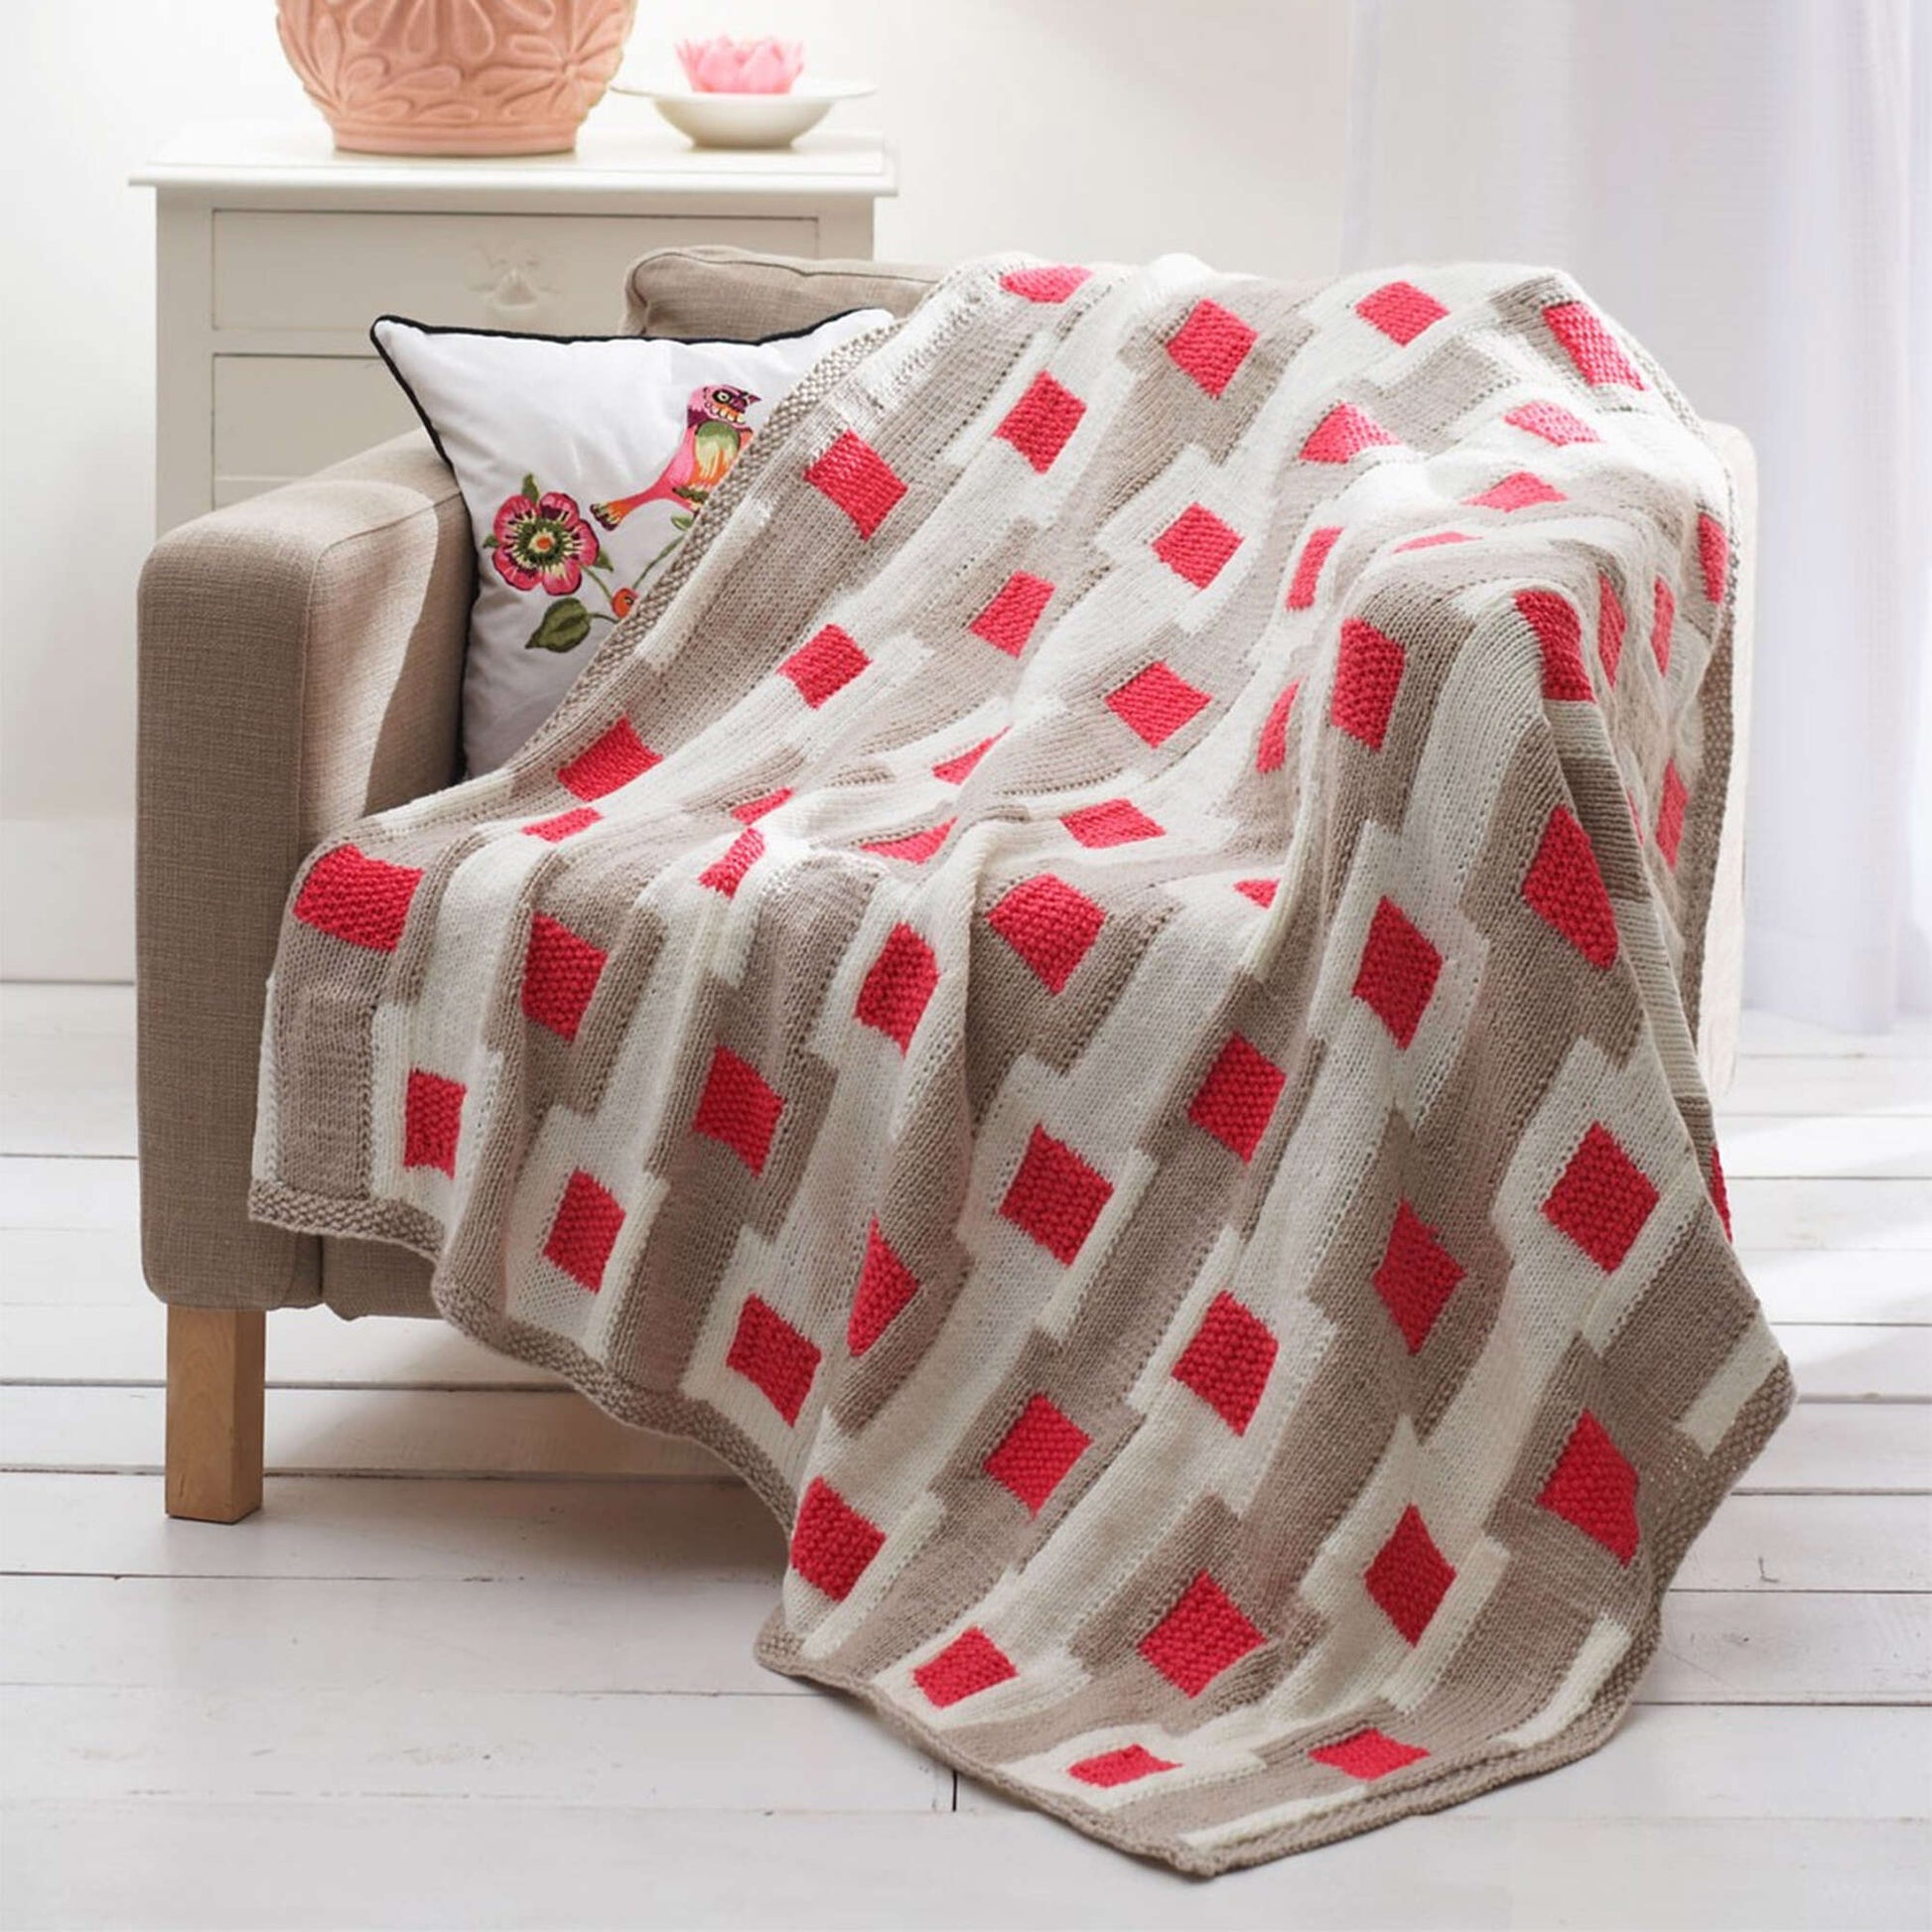 Free Bernat Graphic Gridwork Afghan And Pillow Knit Pattern